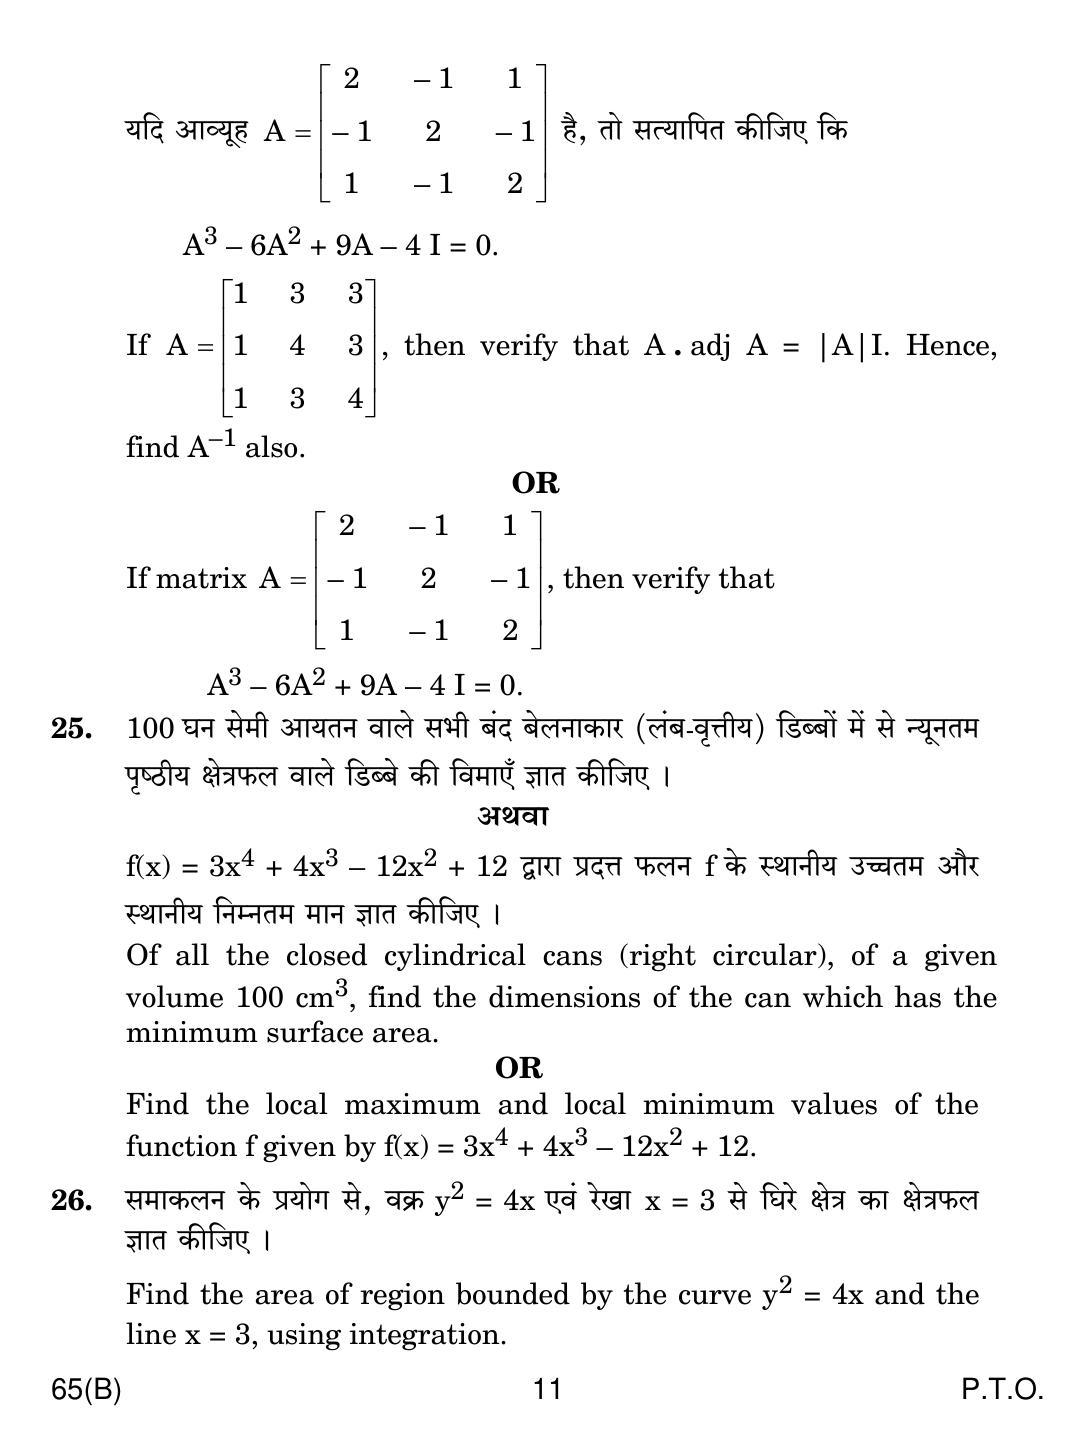 CBSE Class 12 65(B) MATHS For Blind Candidates 2019 Compartment Question Paper - Page 11